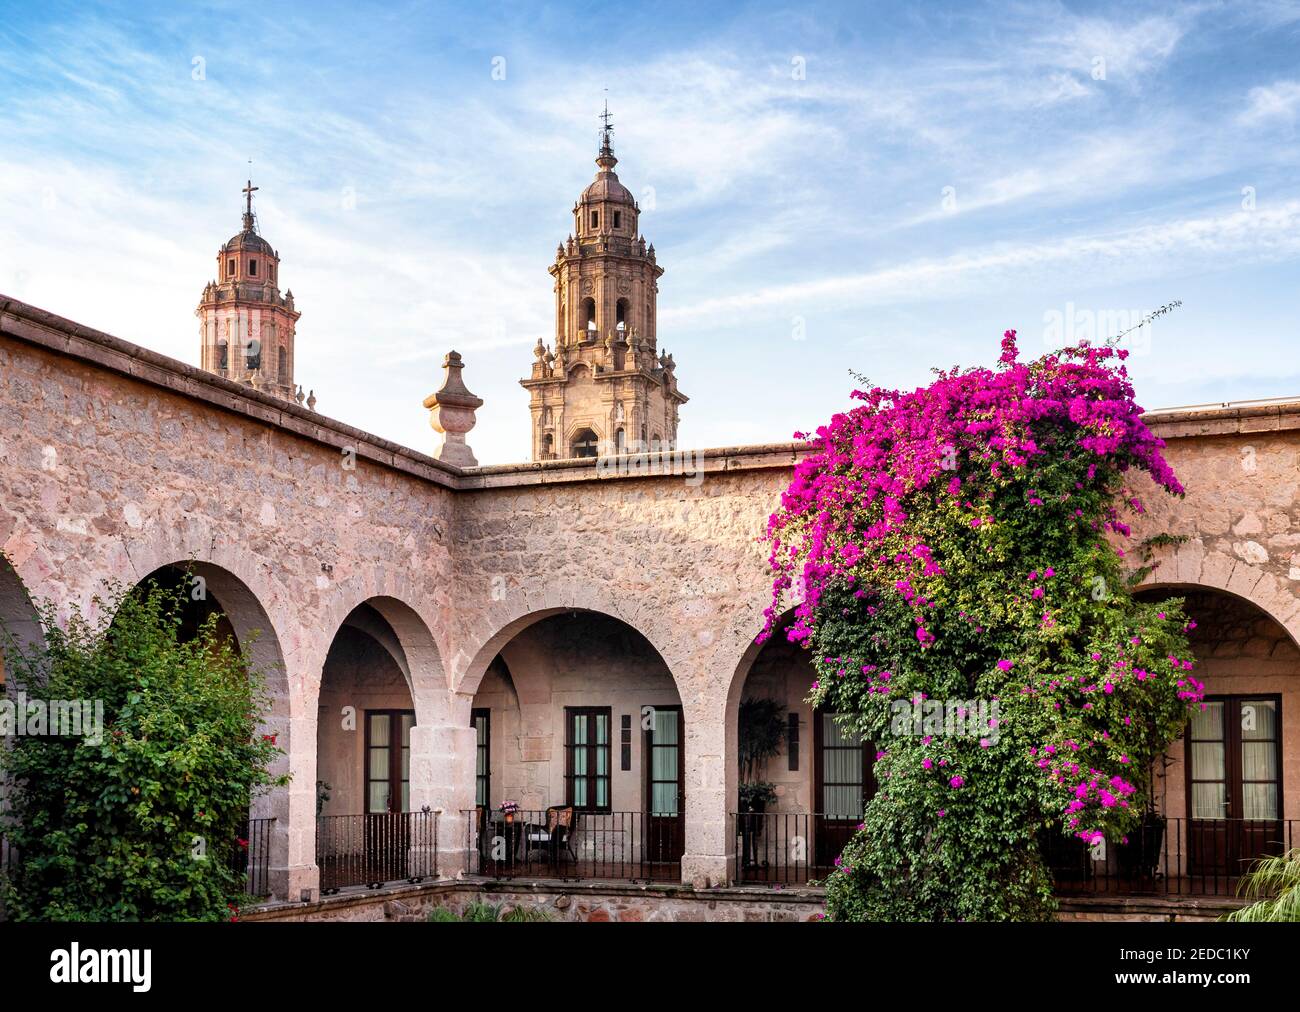 The colonial Hotel Soledad with the towers of the cathedral in the background, Morelia, Michoacan, Mexico. Stock Photo